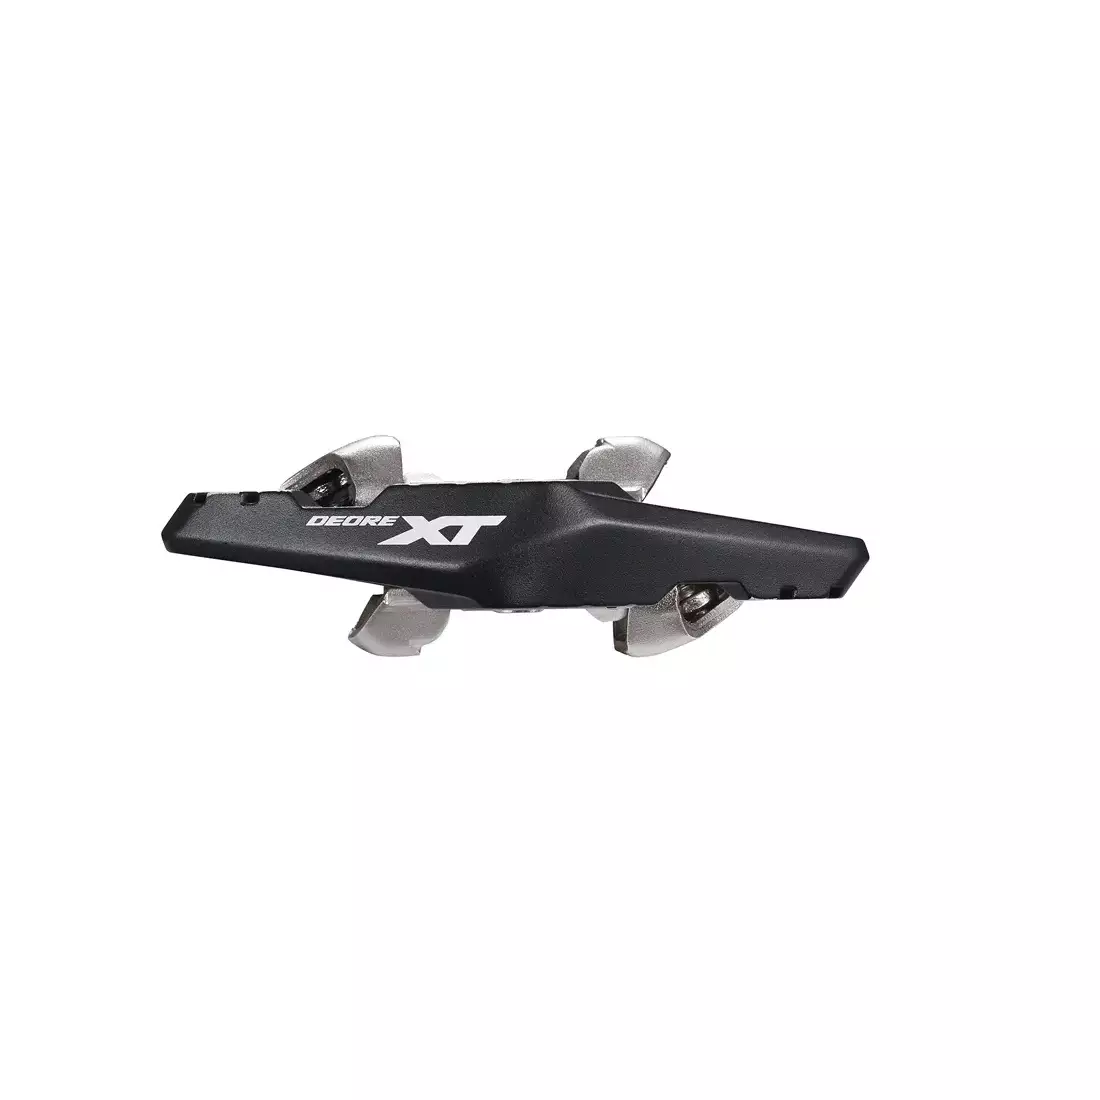 SHIMANO Trail Pedals SPD XT PDM8120 with blocks and spacers